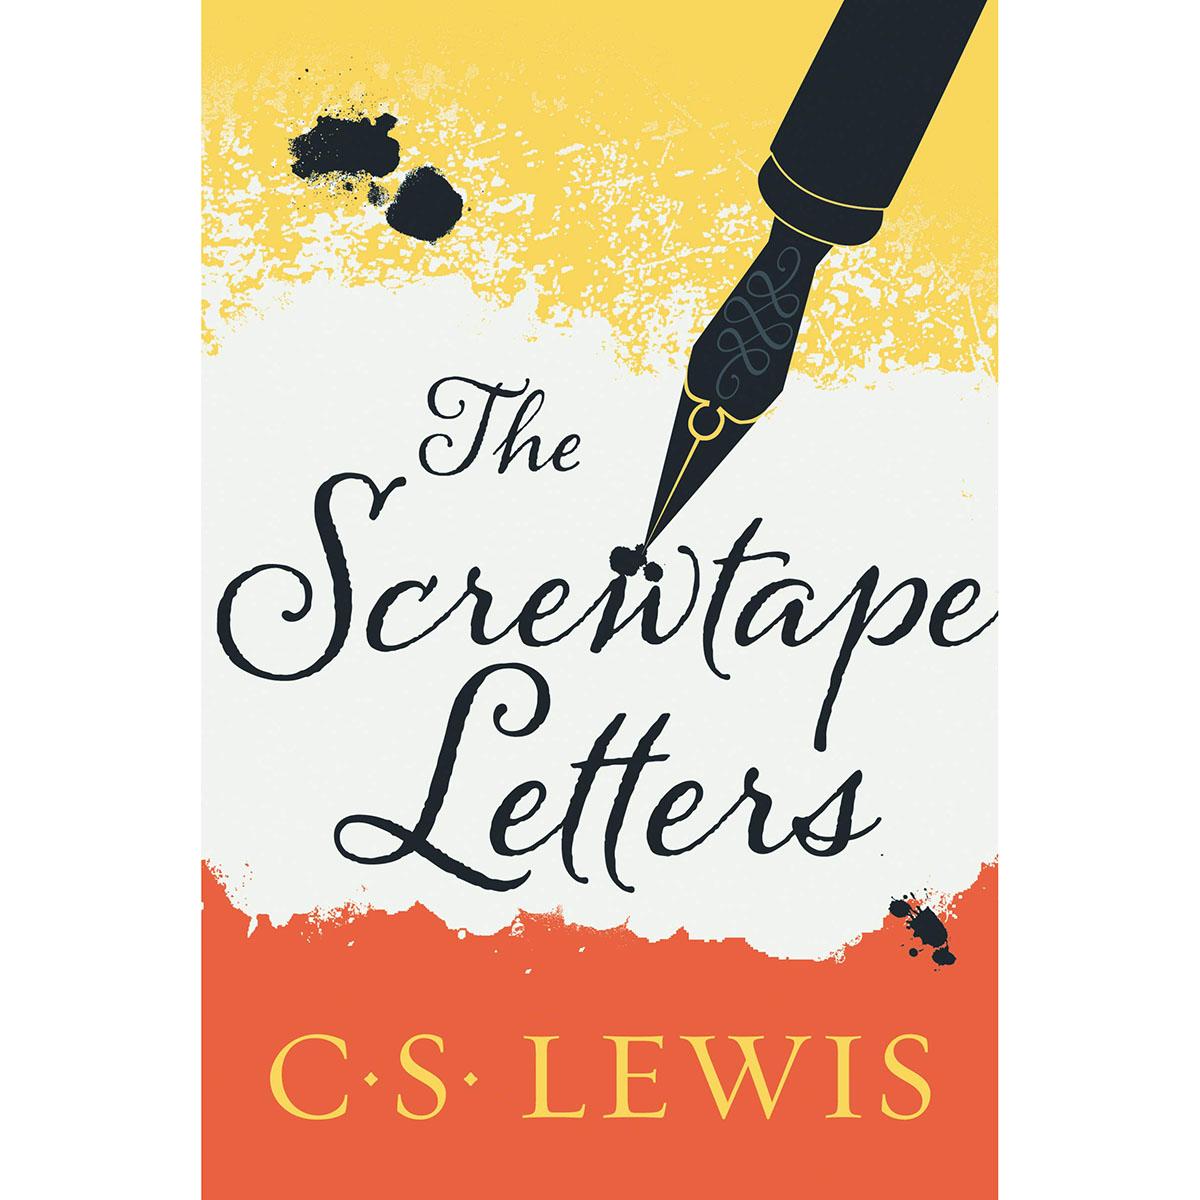 The Screwtape Letters by CS Lewis eBook for $1.99